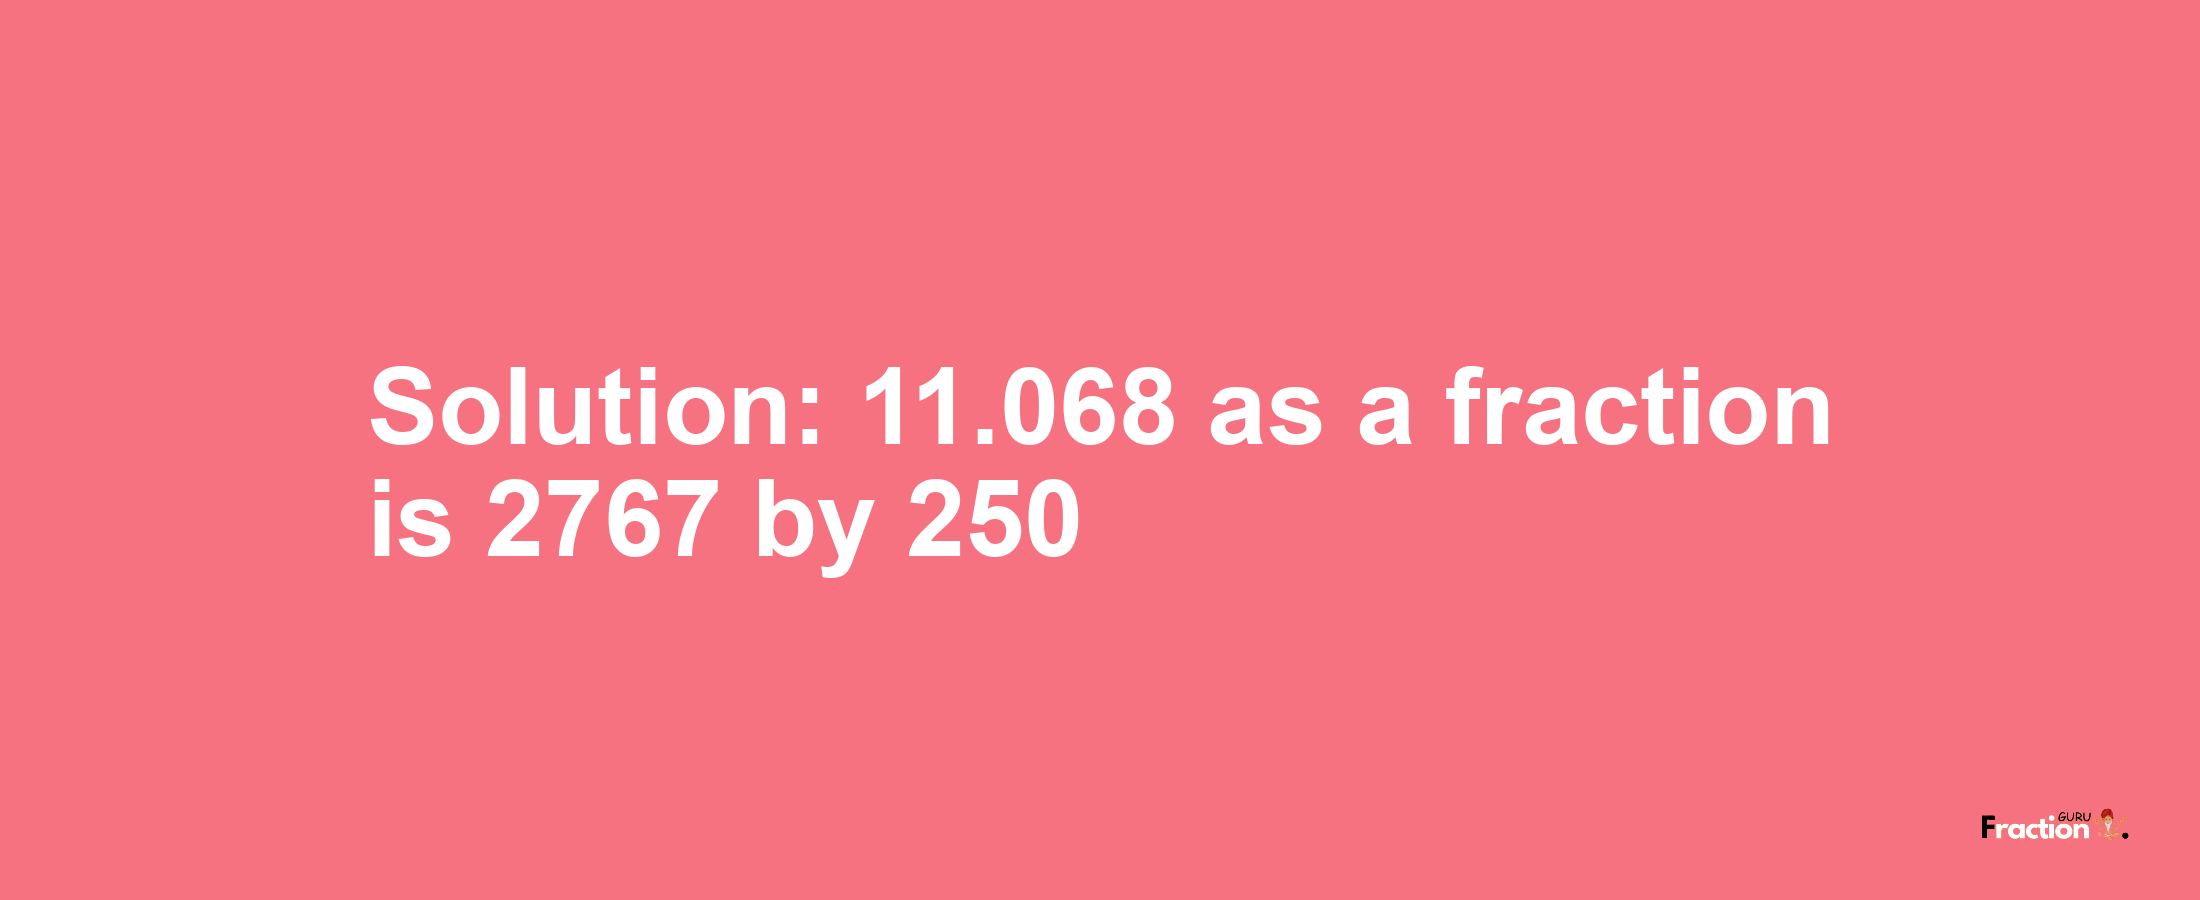 Solution:11.068 as a fraction is 2767/250